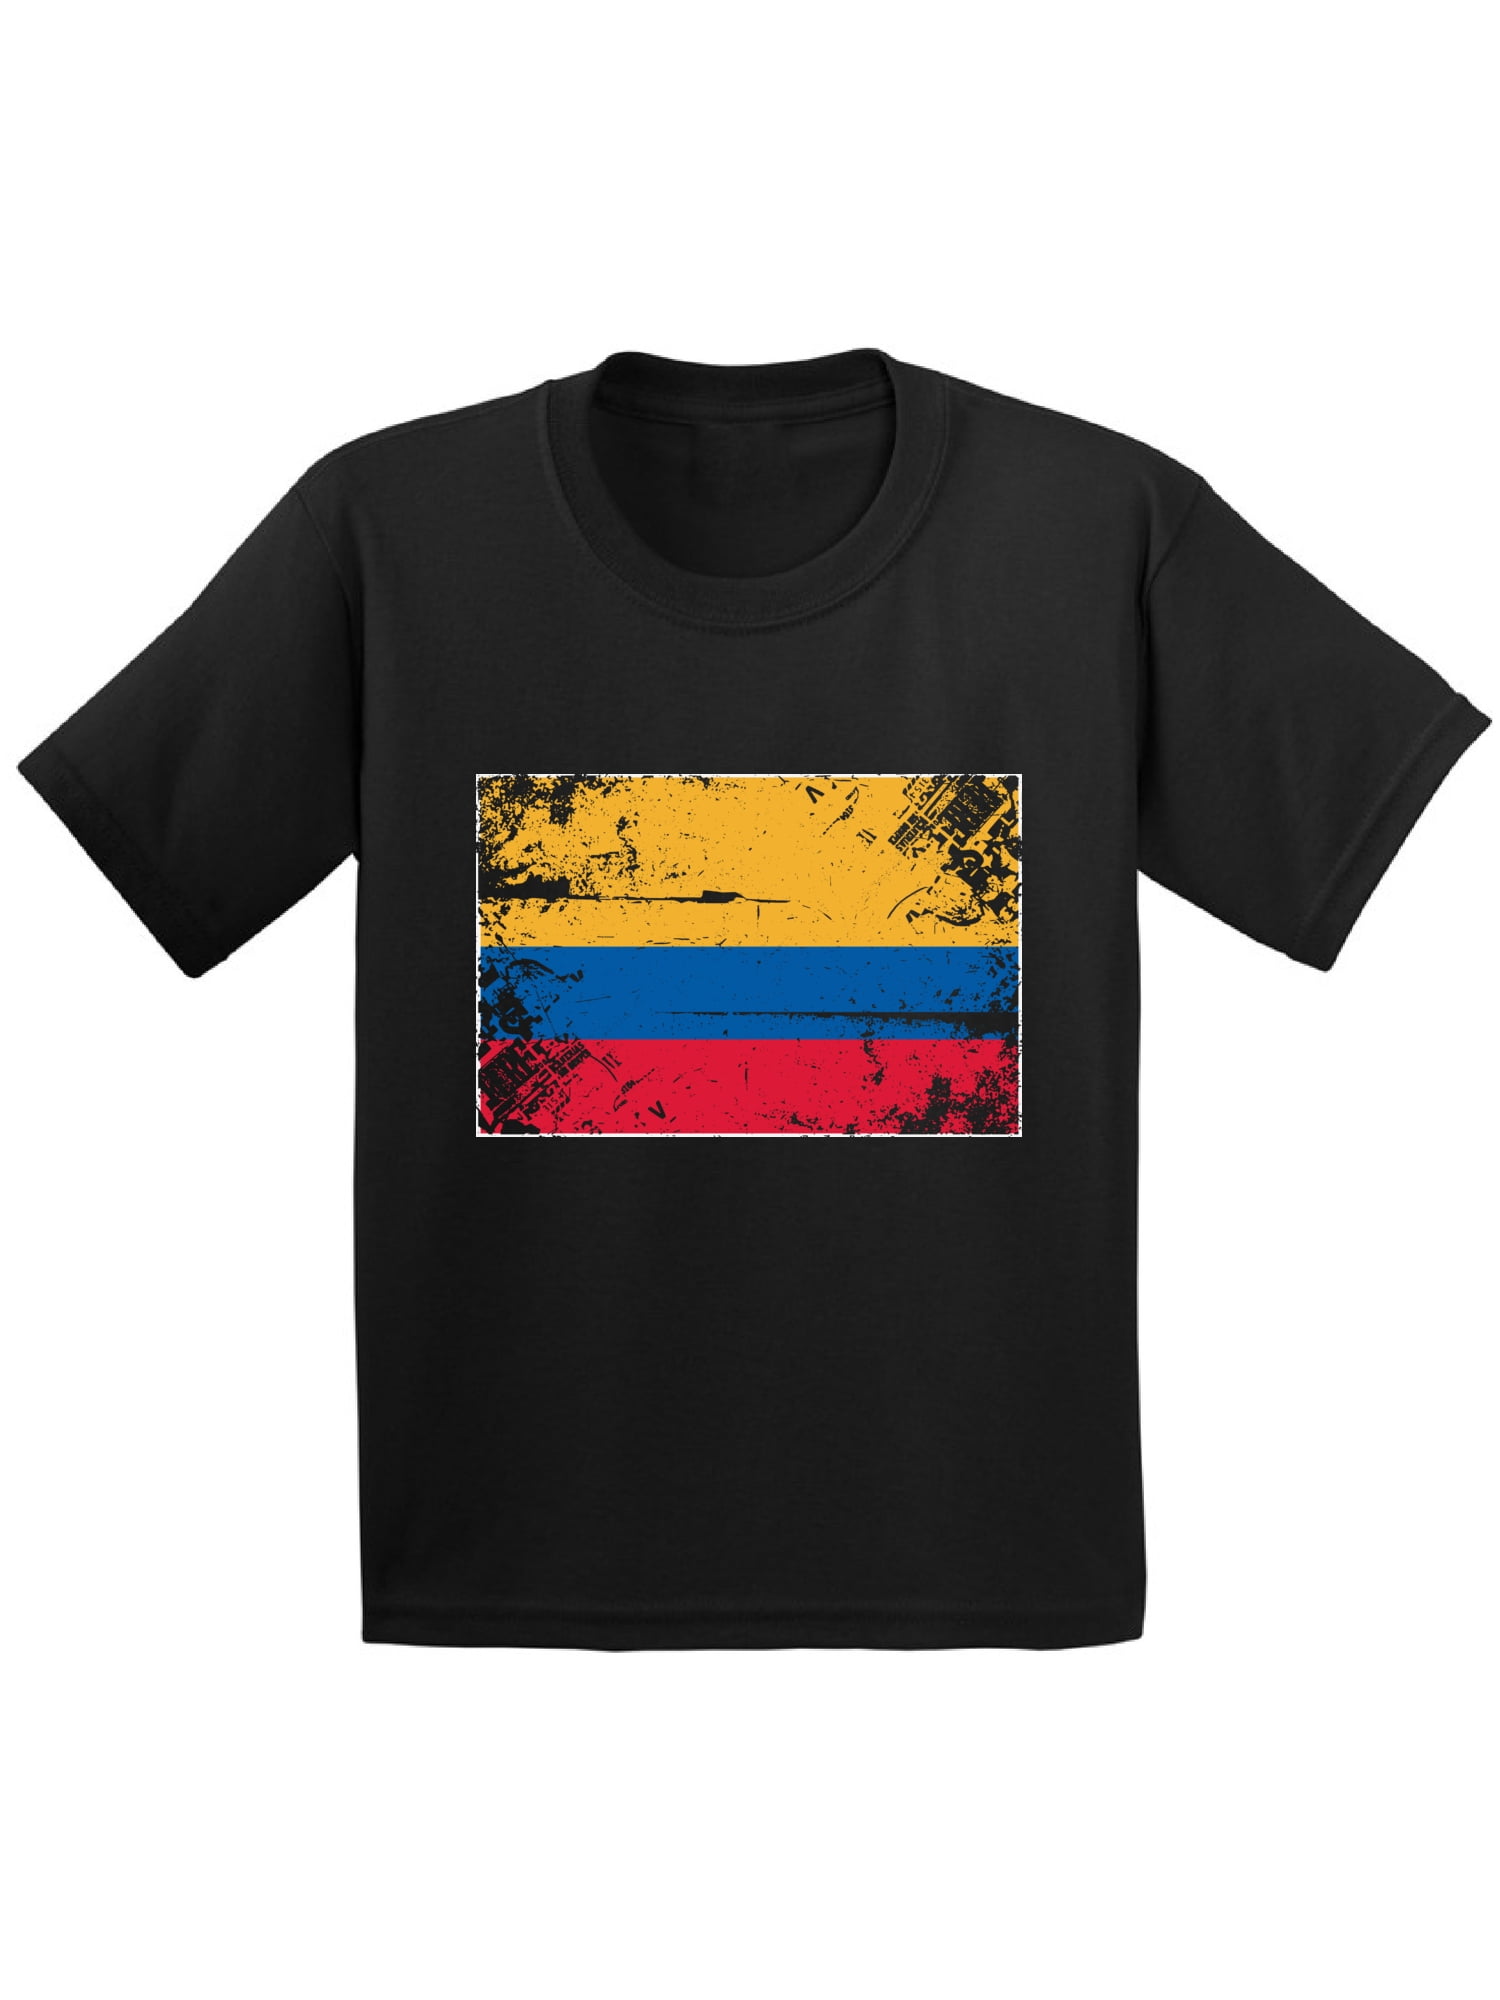 colombia shirt